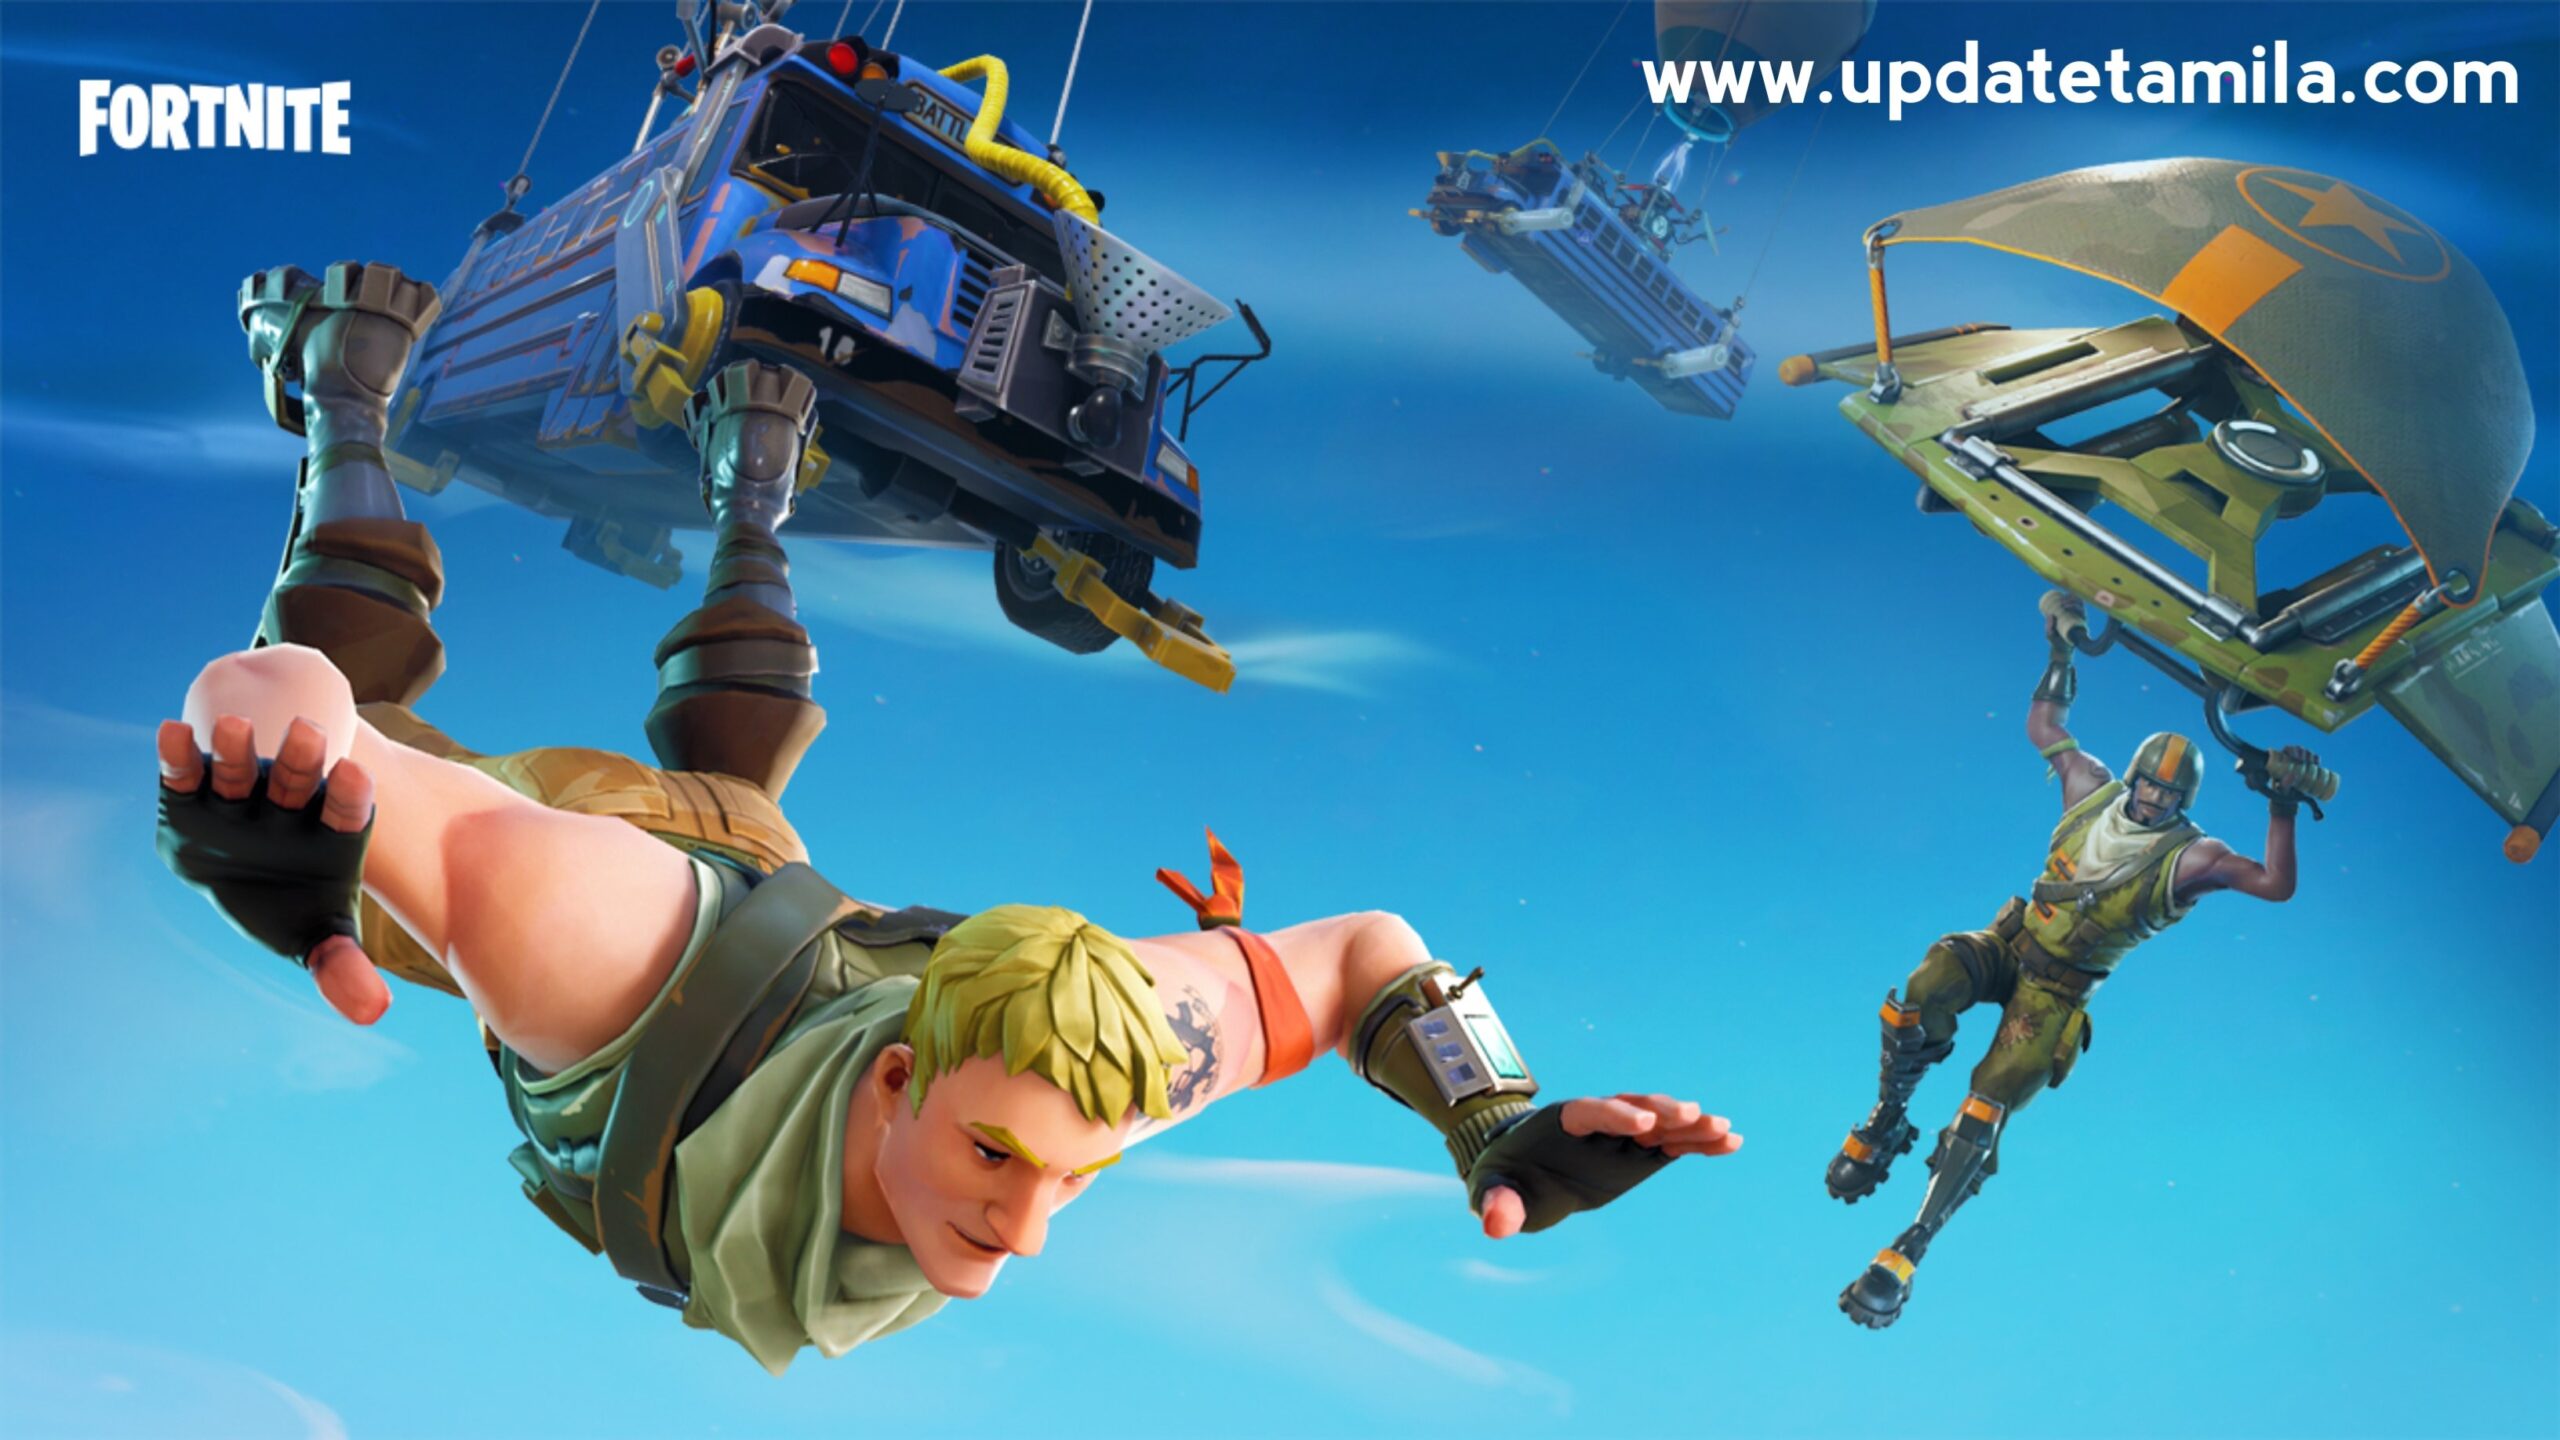 2. Geometry Spot Fortnite: Battle Royale with AnglesFortnite Geometry Spot takes a geometric twist with Fortnite. Enter the battlefield armed not only with weapons, but also with angles and spatial awareness. Strategically navigate the game using geometry to outsmart enemies and win.